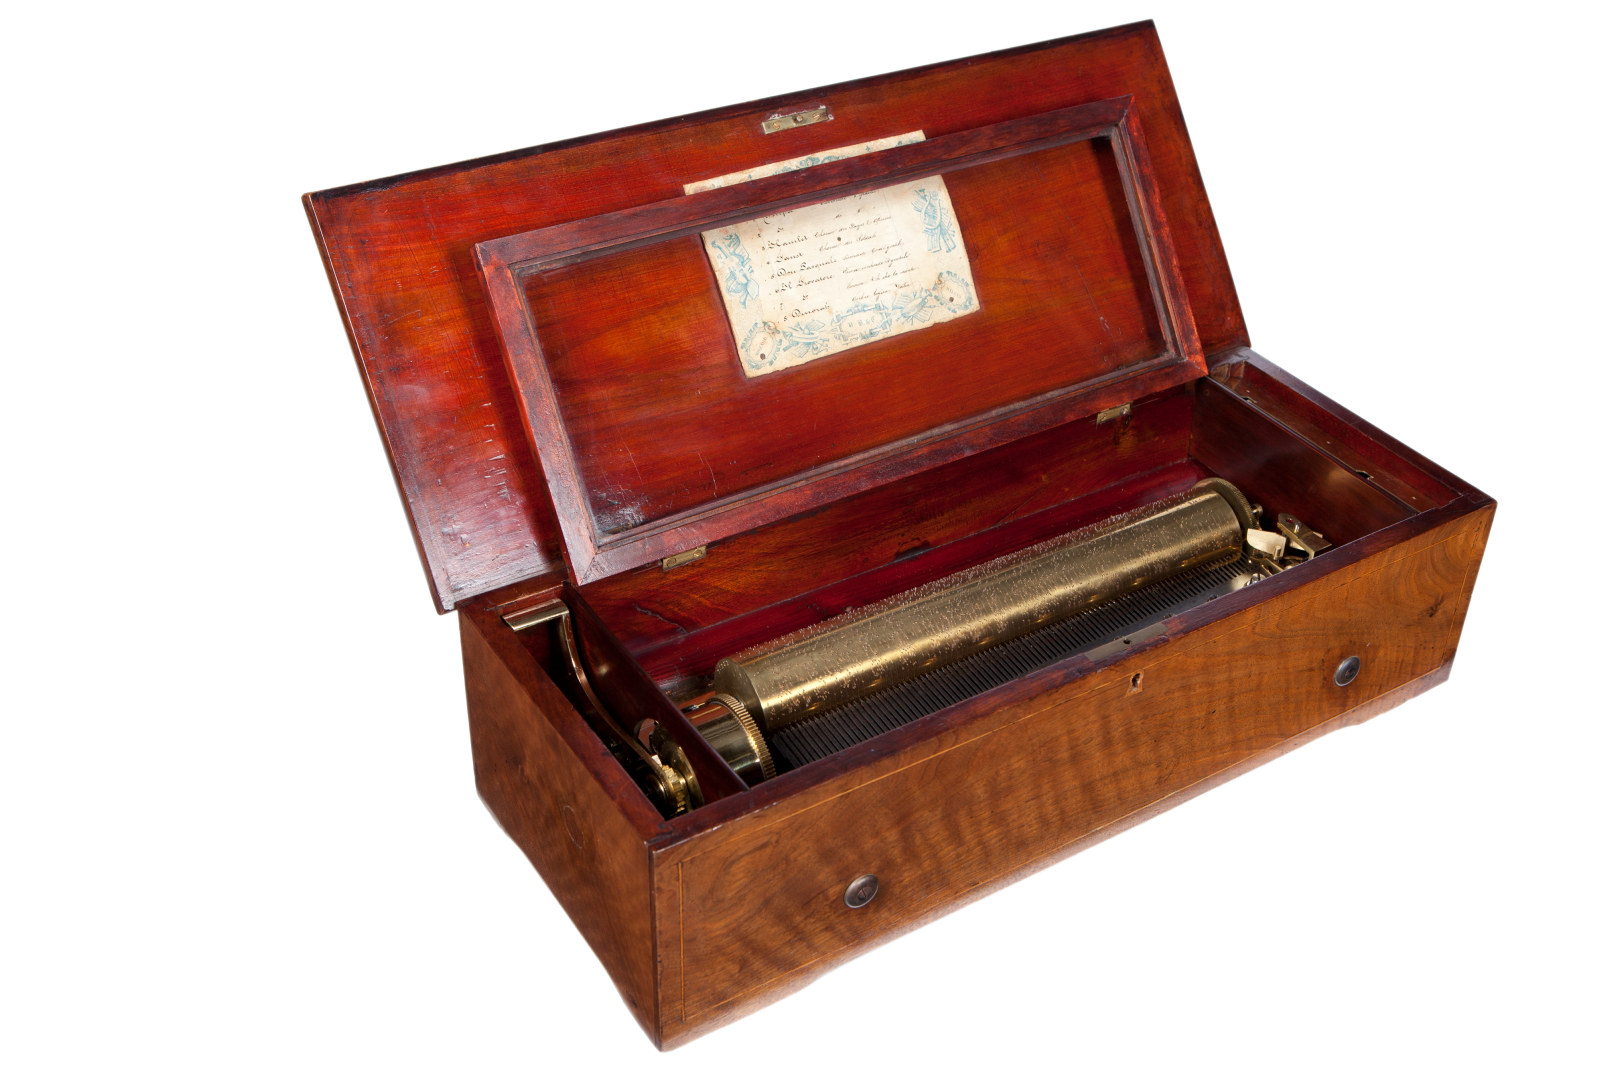 Eight tune music box housed in a fruit wood case, manufactured by Le Coultre, Geneva, c1860